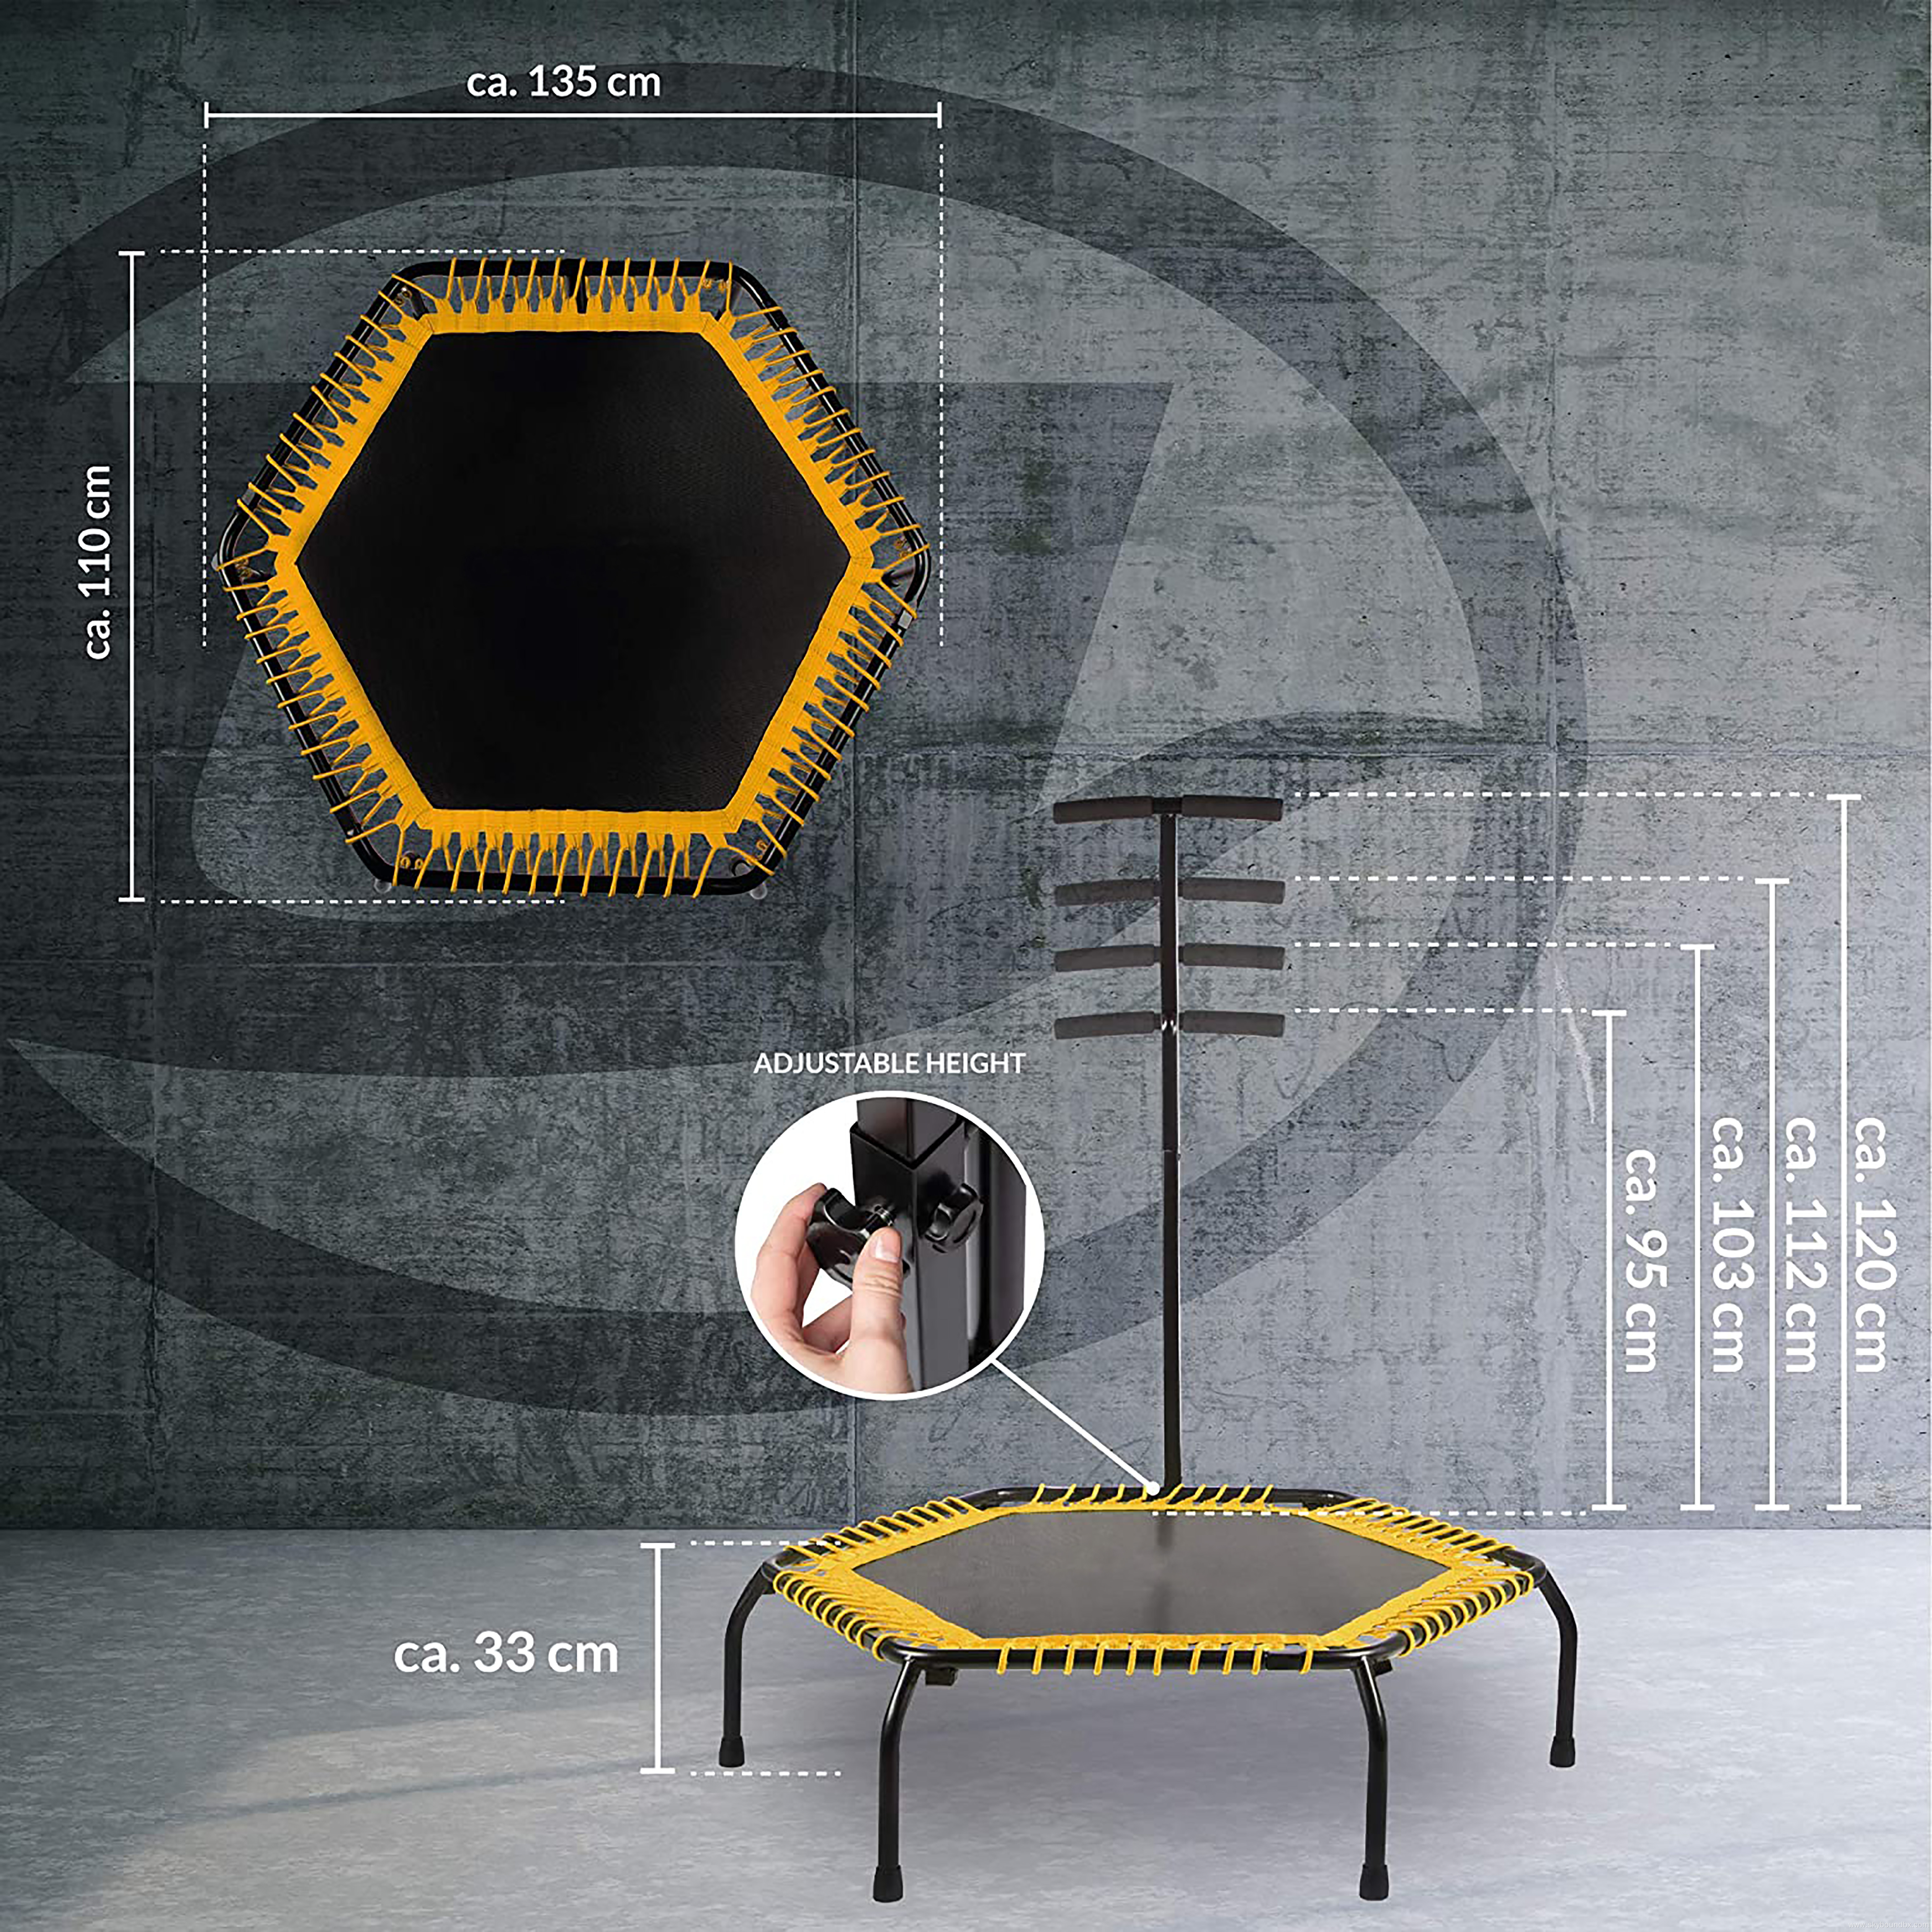 Gym fitness 50 inch hexagon trampoline with handle